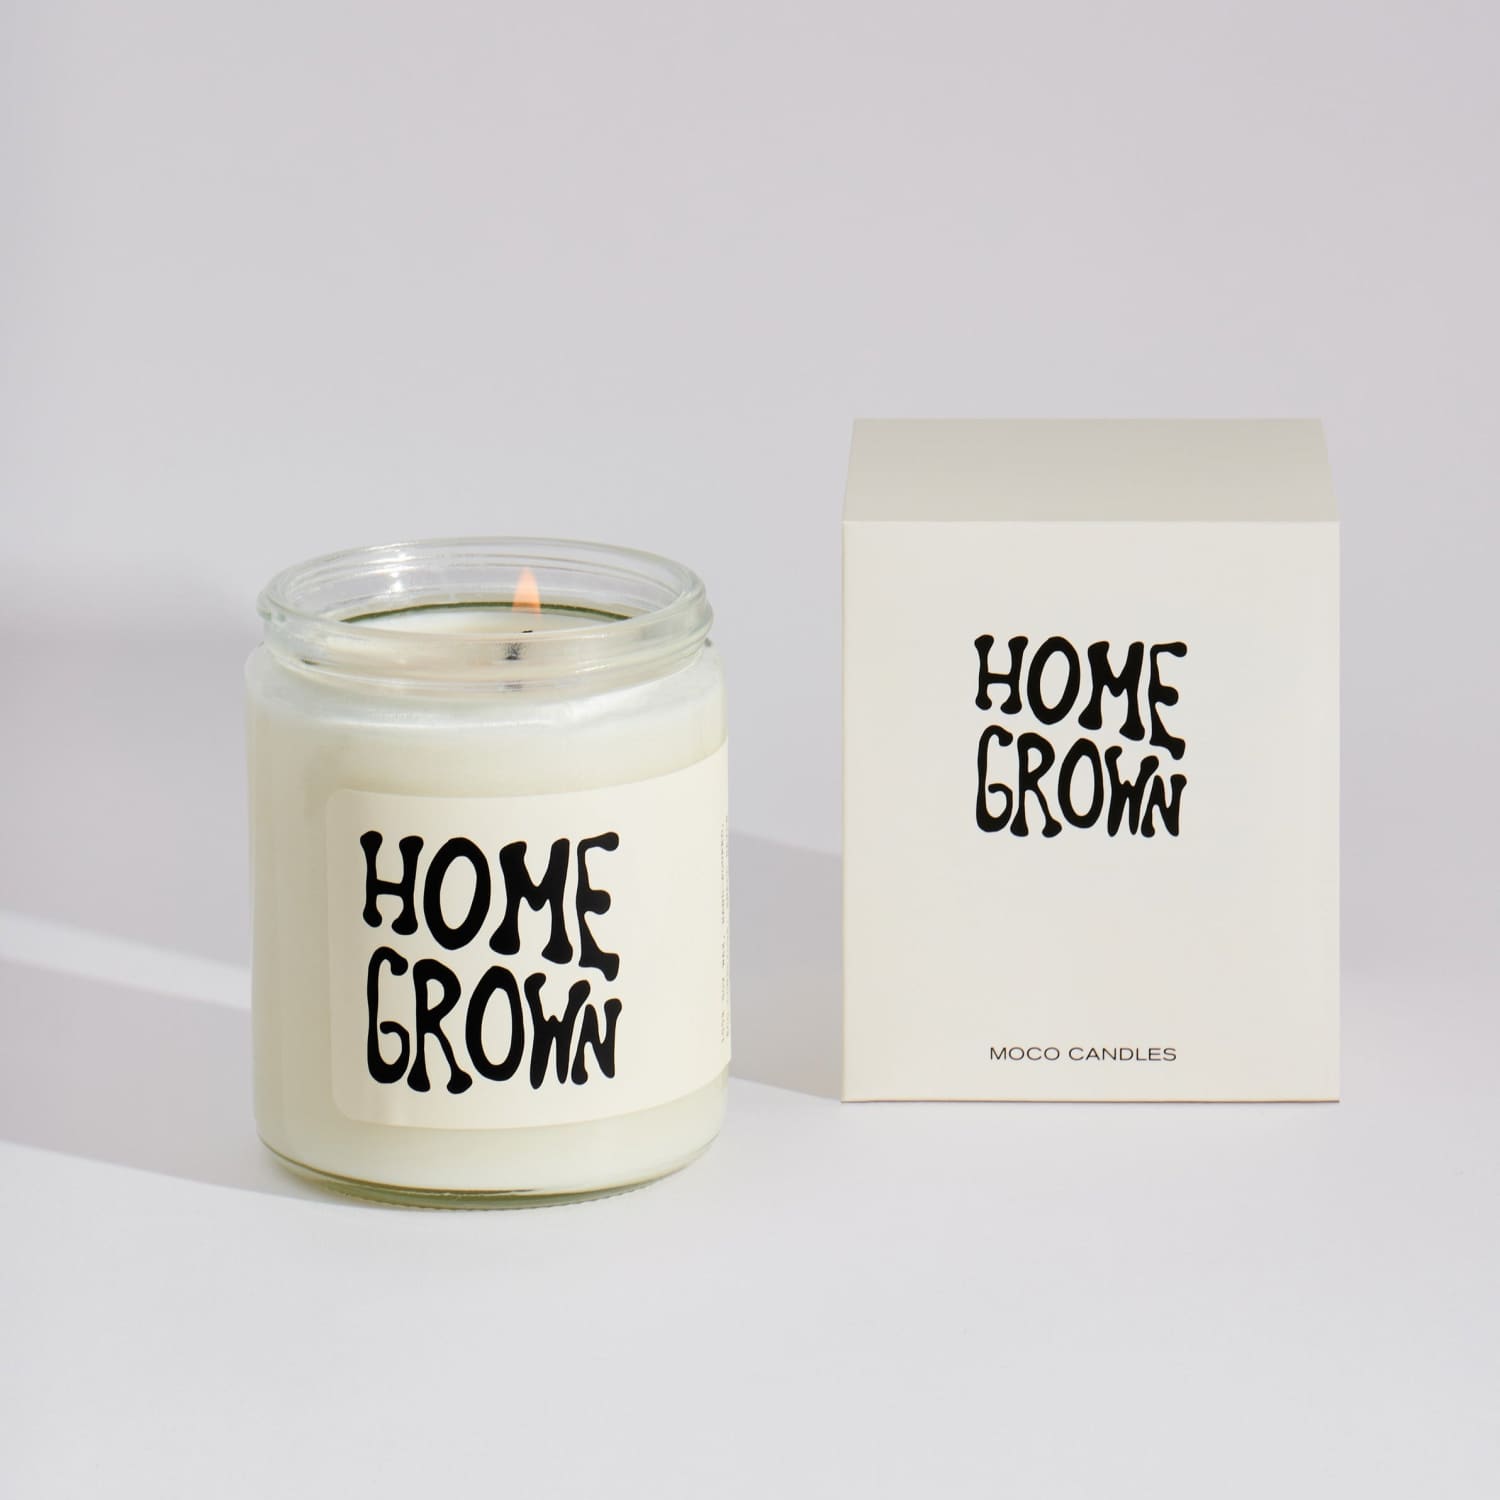 Moco Candles - Home Grown Candle - Gift - Groupbycolor -